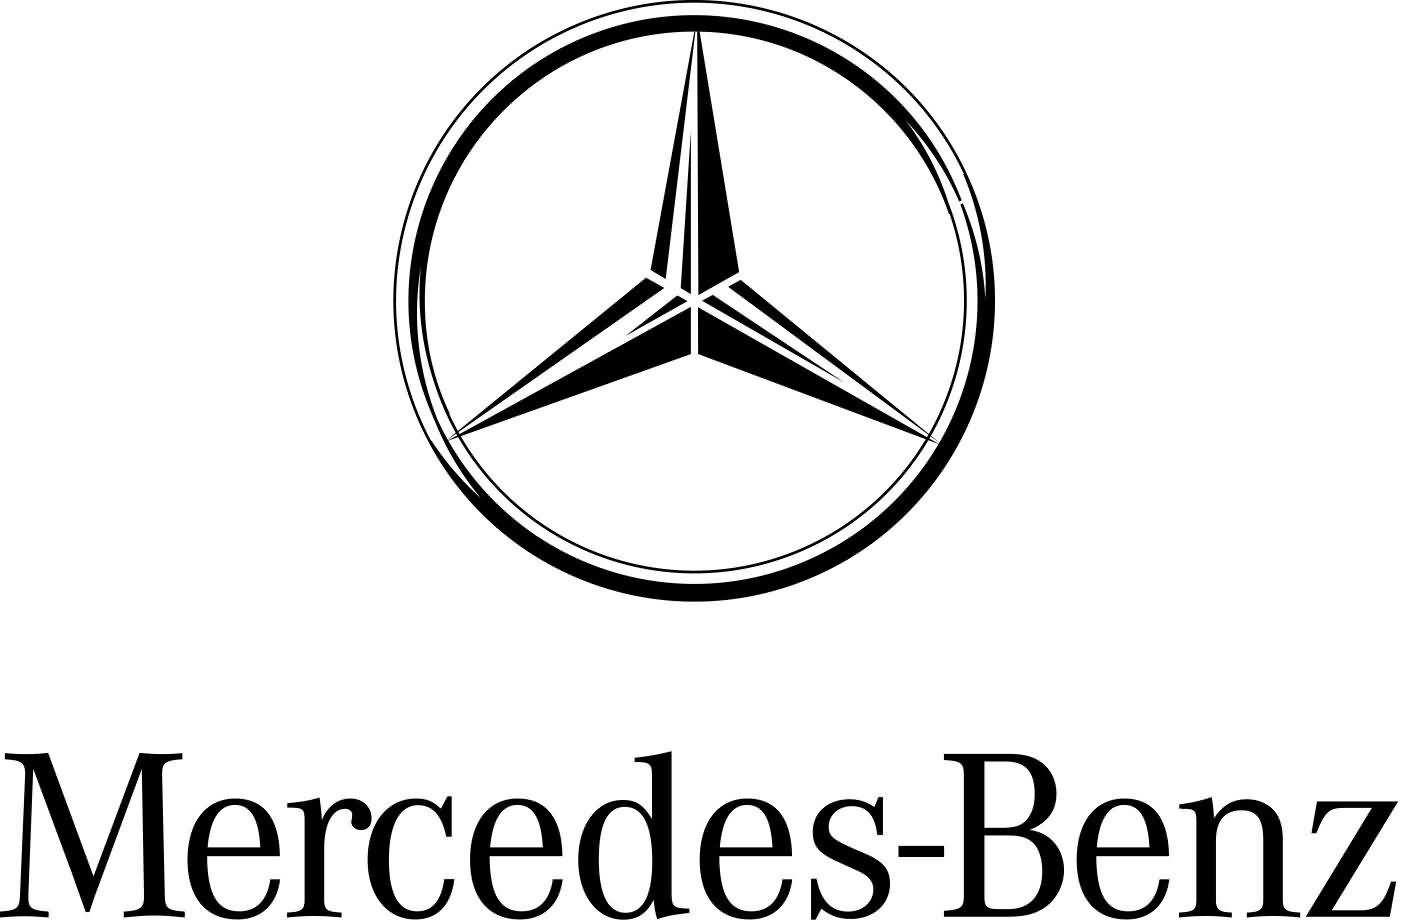 Daimler Mercedes Logo - Mercedes Logo, Mercedes-Benz Car Symbol Meaning and History | Car ...